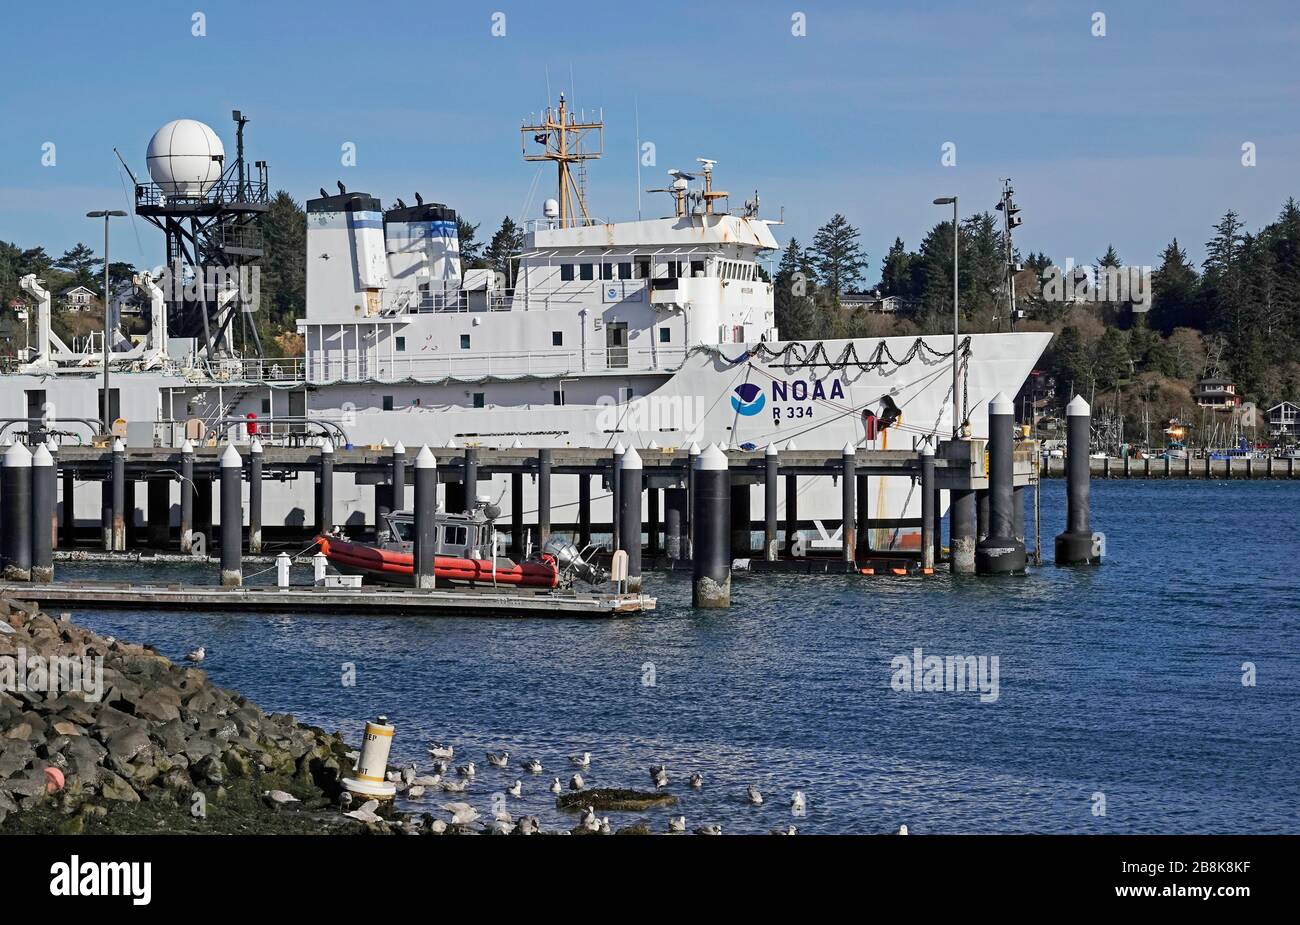 The NOAA (National Oceanic and Atmospheric Administration) ship Hi'ialakai (R 334), part of the Pacific Fleet stationed in Newport, Oregon. Stock Photo